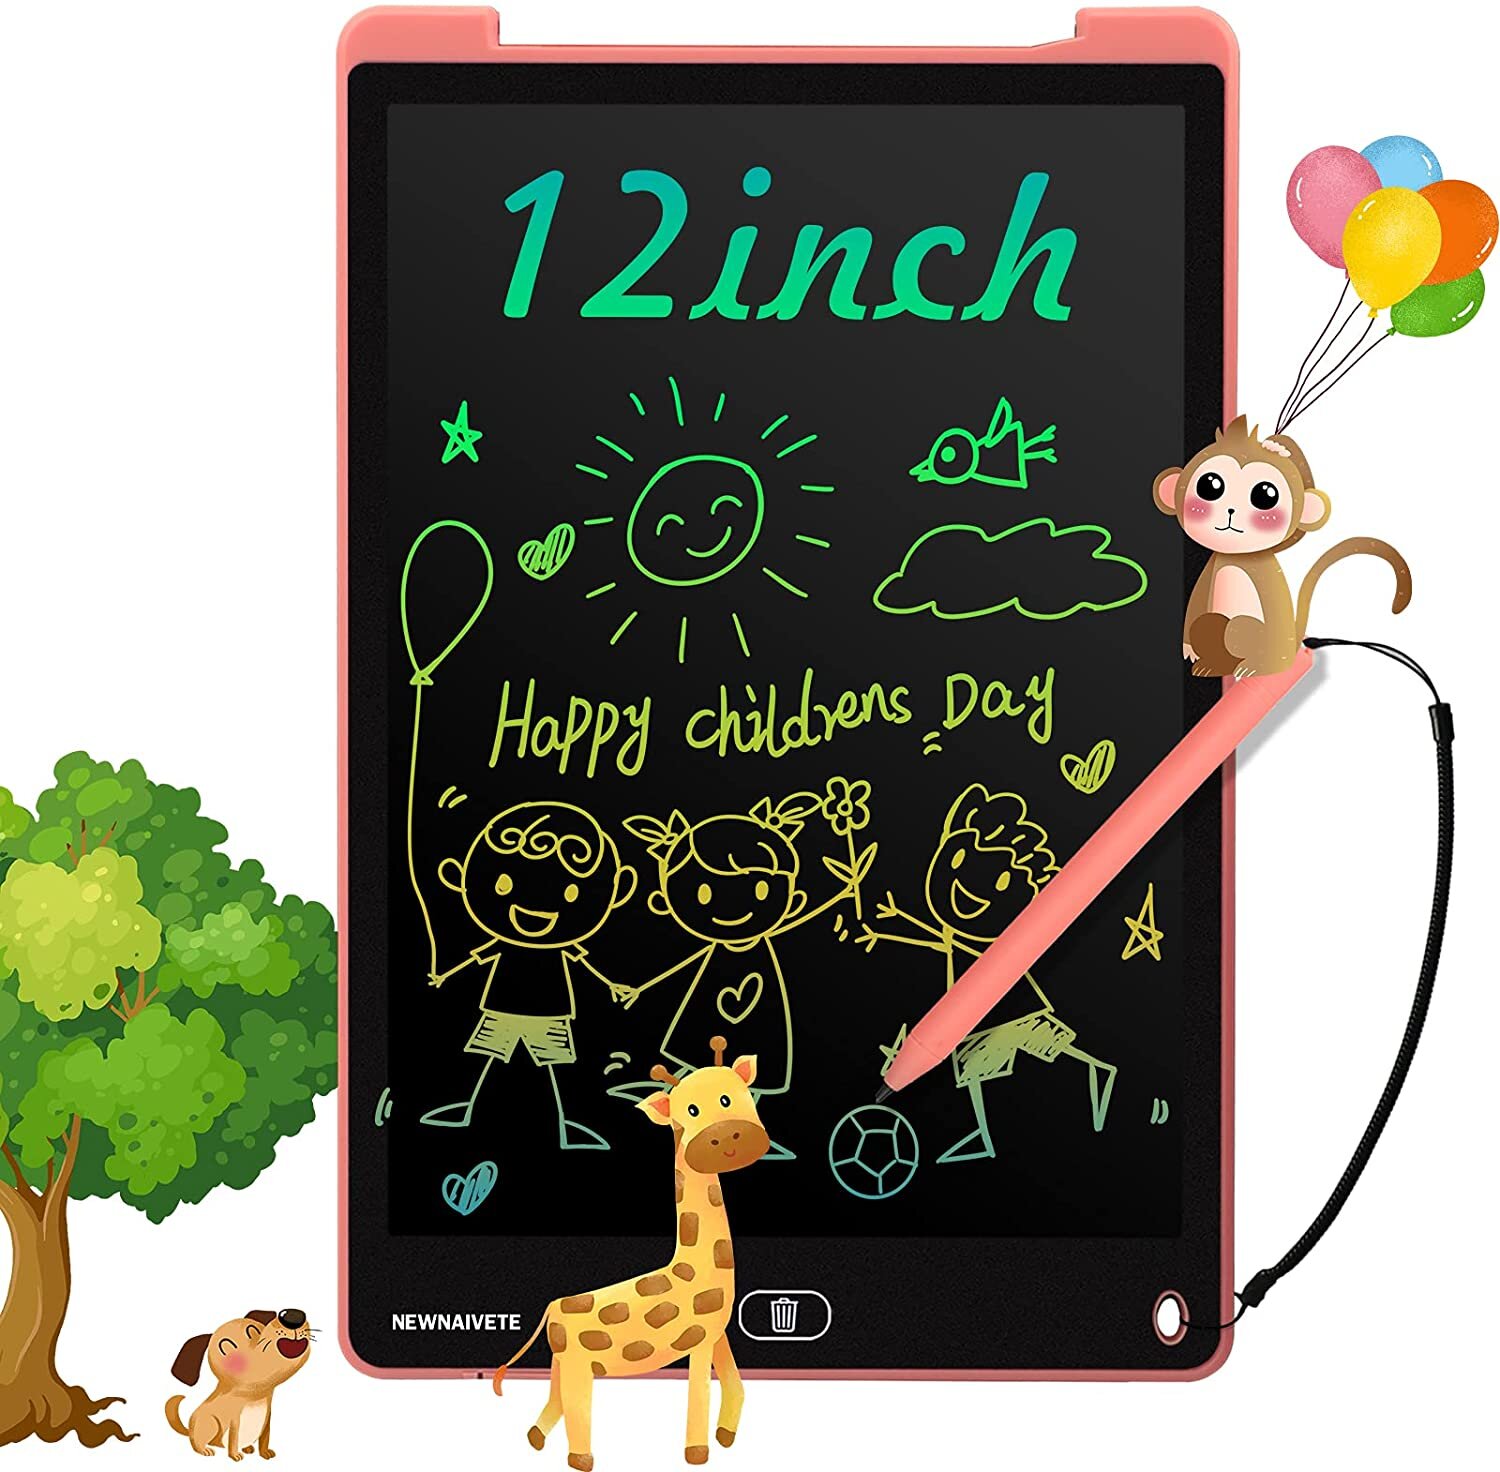 Handwriting Doodle Board Erasable Reusable Doodle Pad Gift for Kids and Adults at Home,School and Office Painting and Memo Lists 1pcs 15 Inch Electronic Kids Drawing Board LCD Writing Tablet